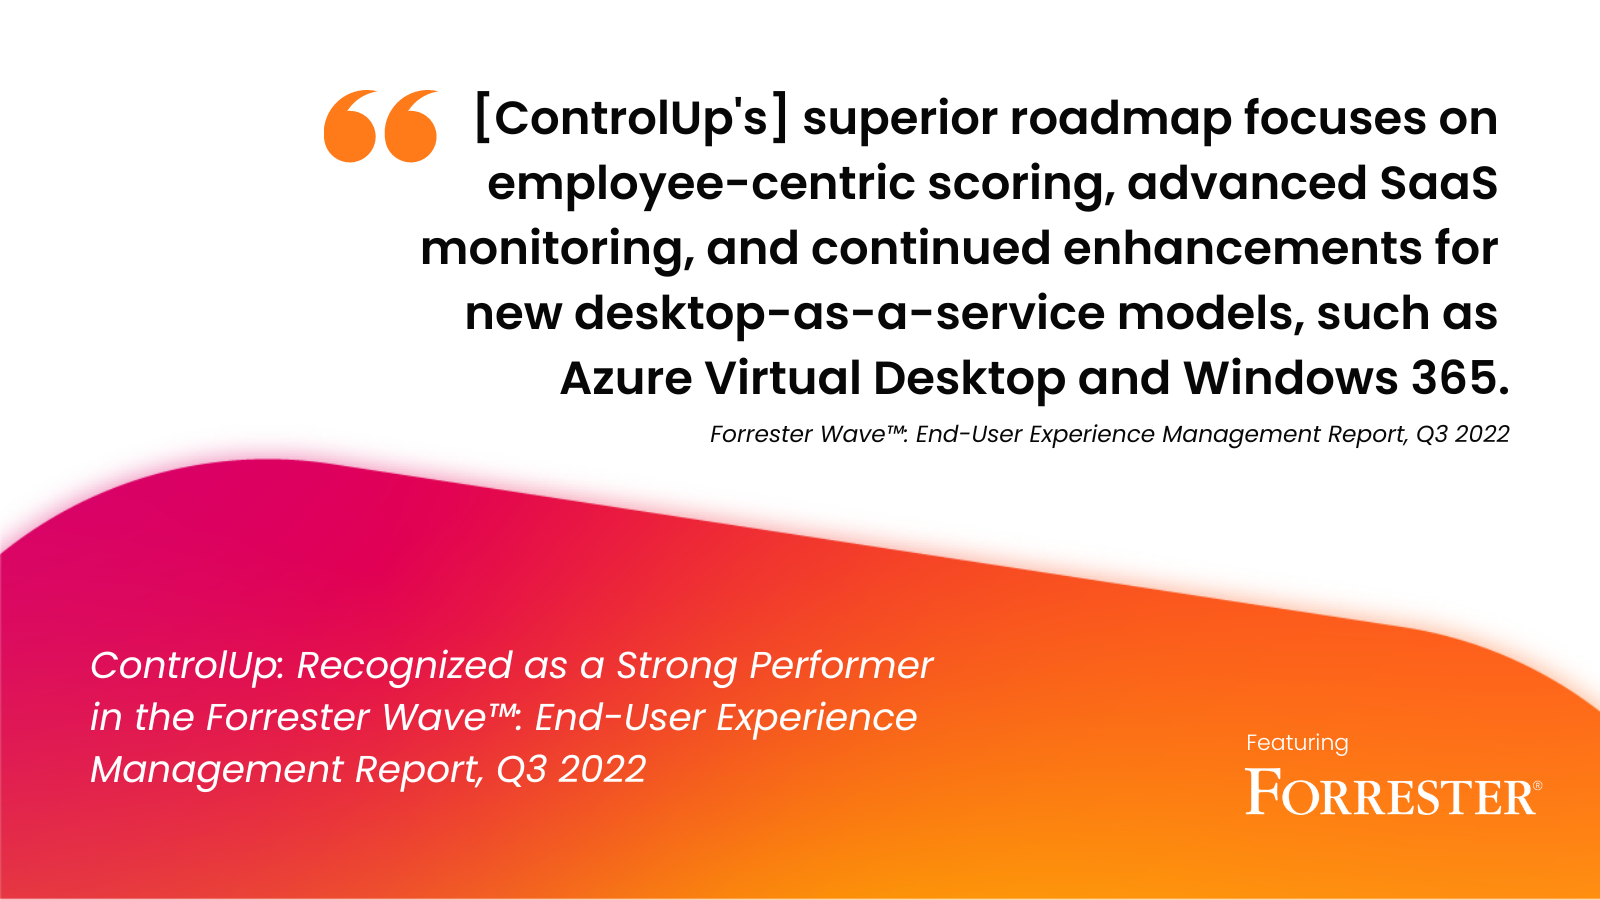 Quote from Forrester Wave about ControlUp's EUEM solution.